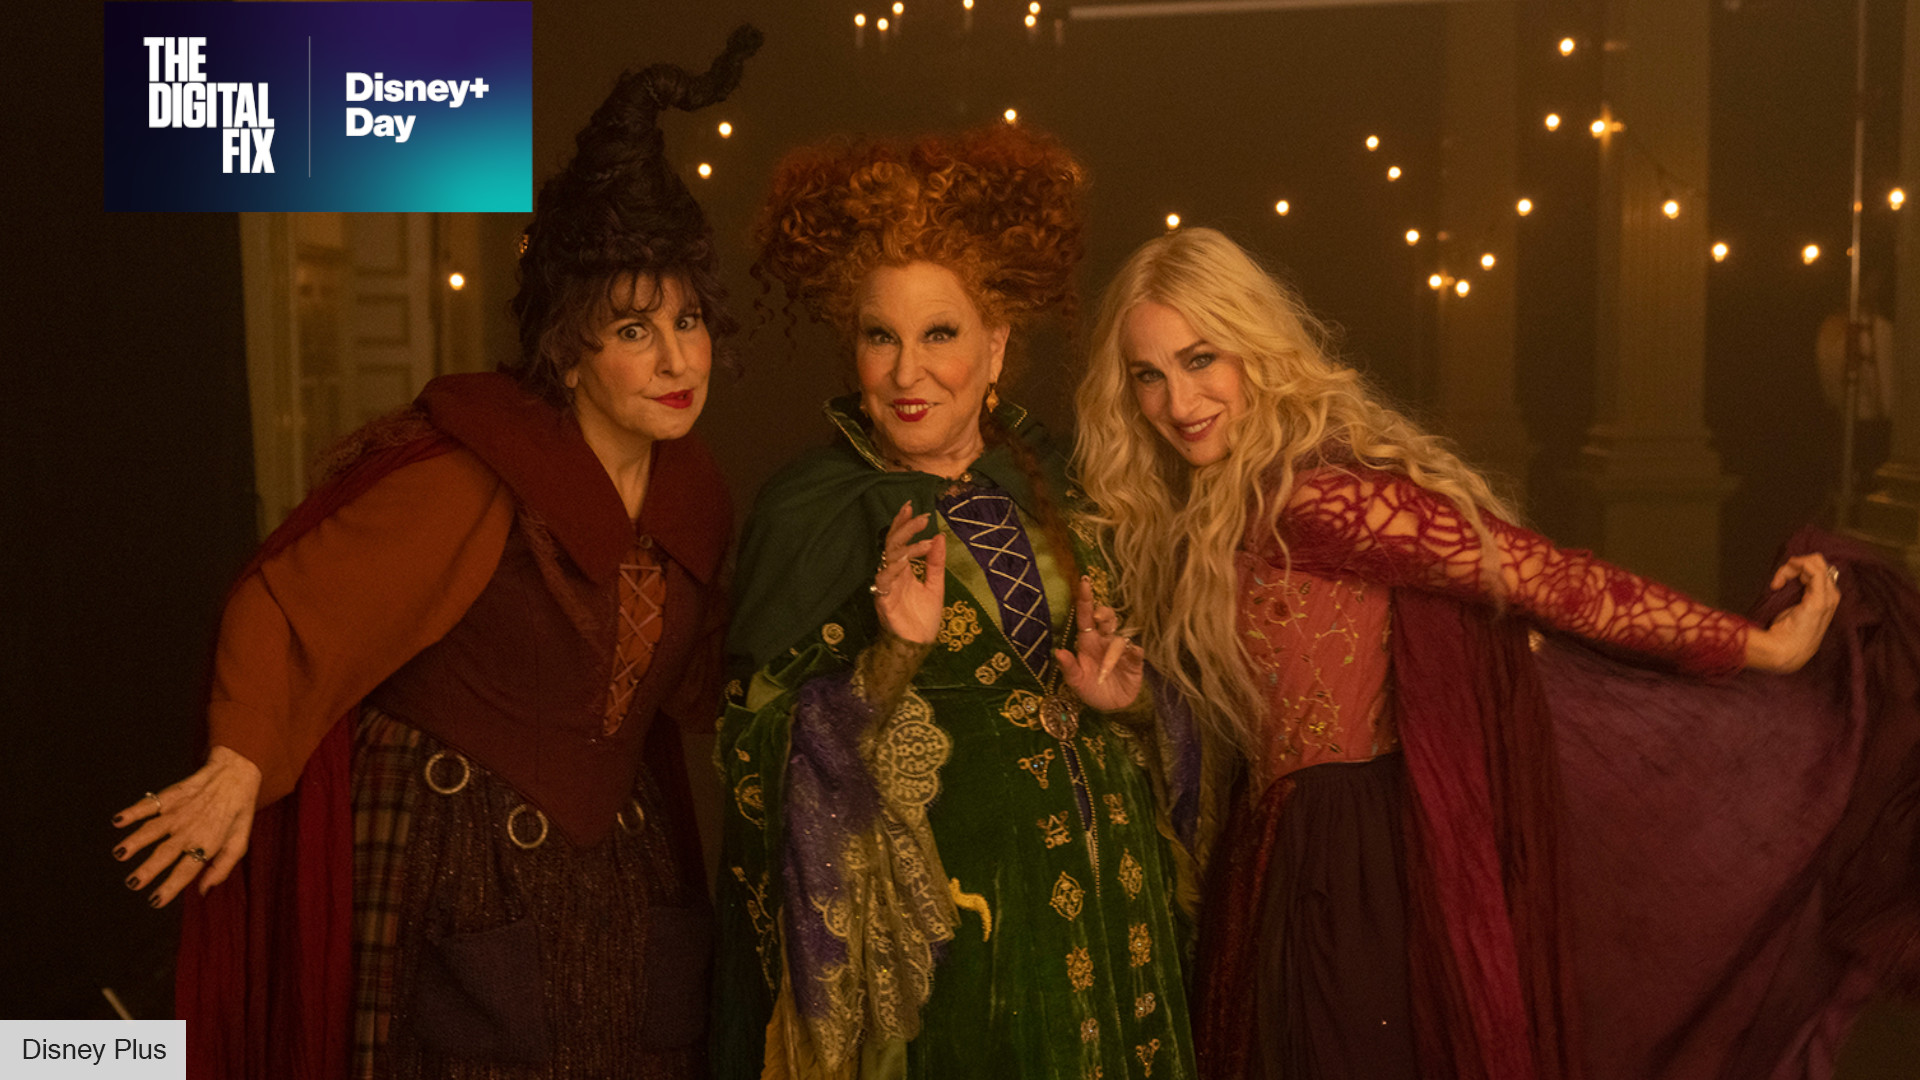 Hocus Pocus 2 just gave us our first look at the Sanderson Sisters. The Digital Fix